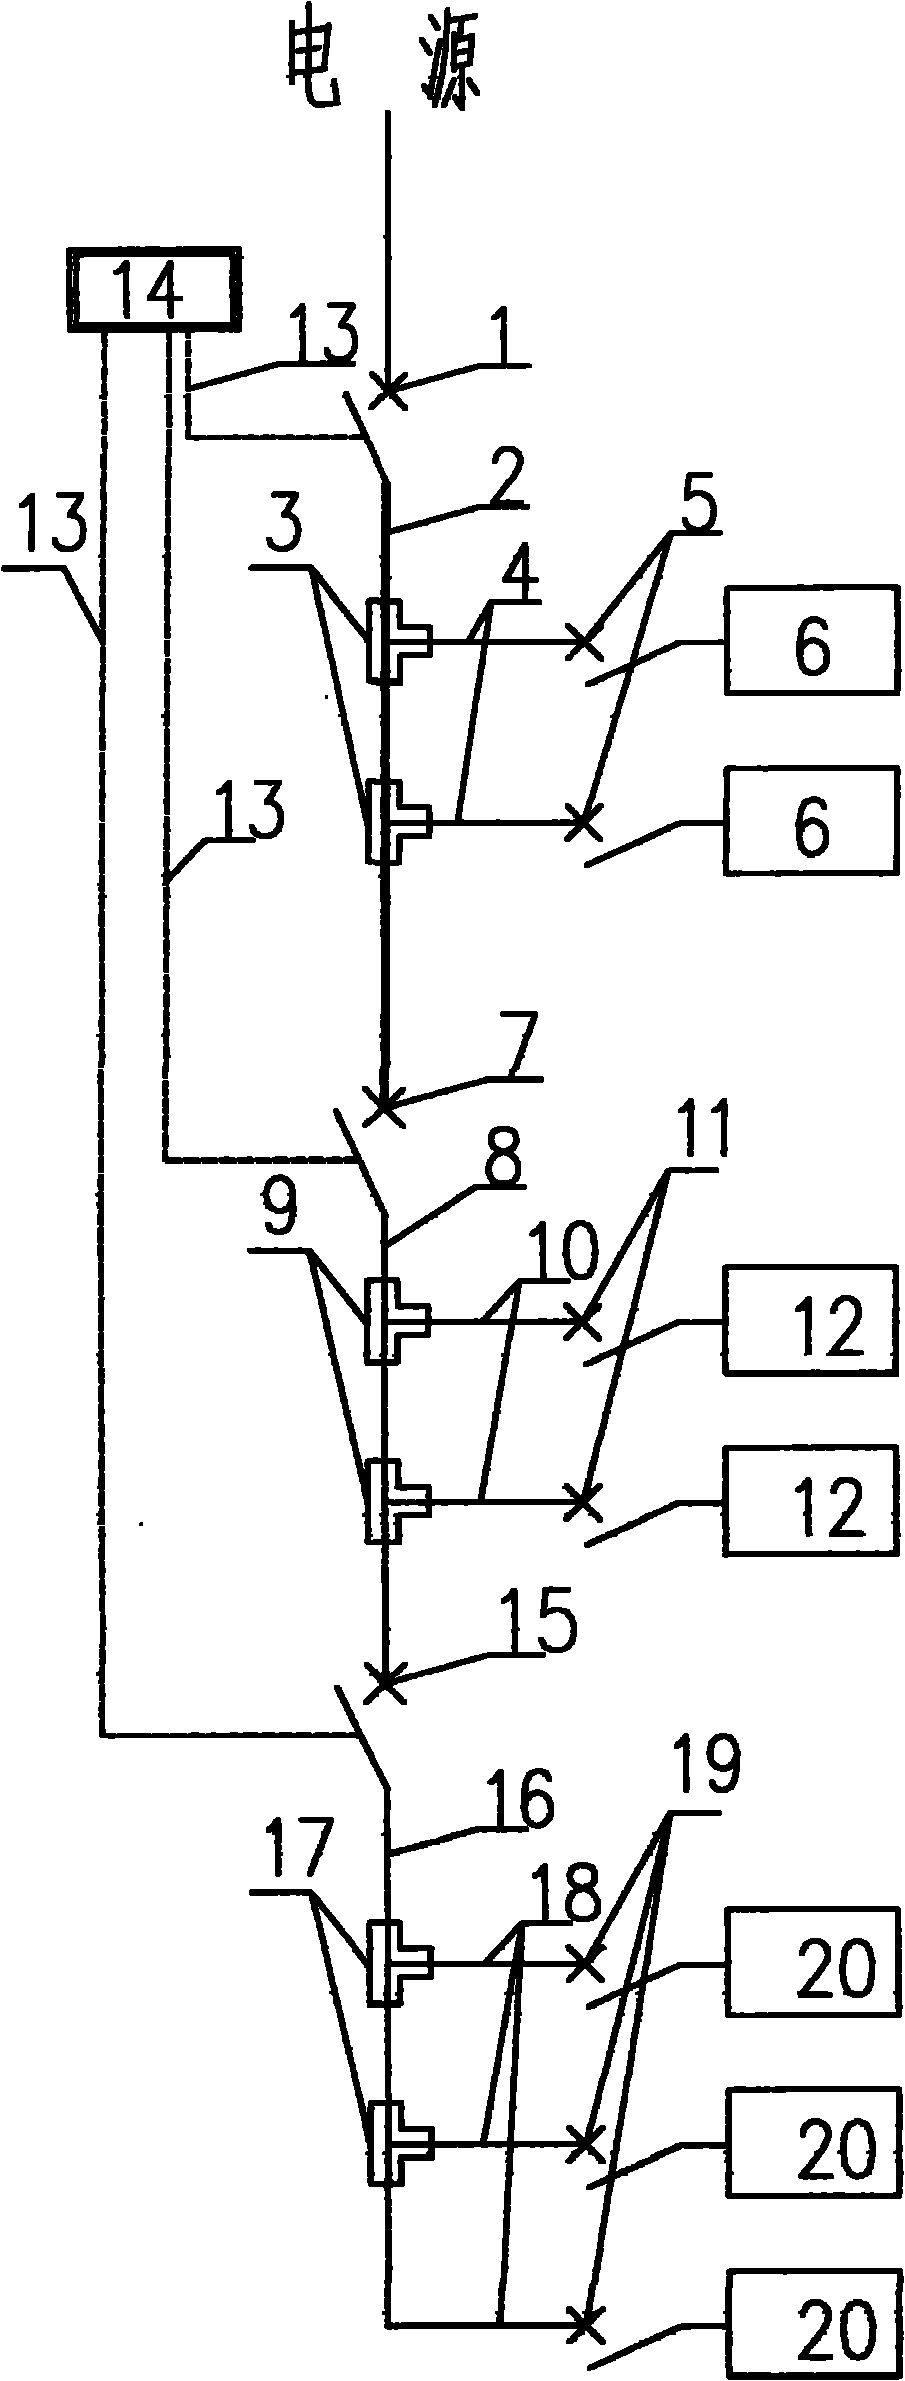 Power supply and distribution methods of low-voltage system